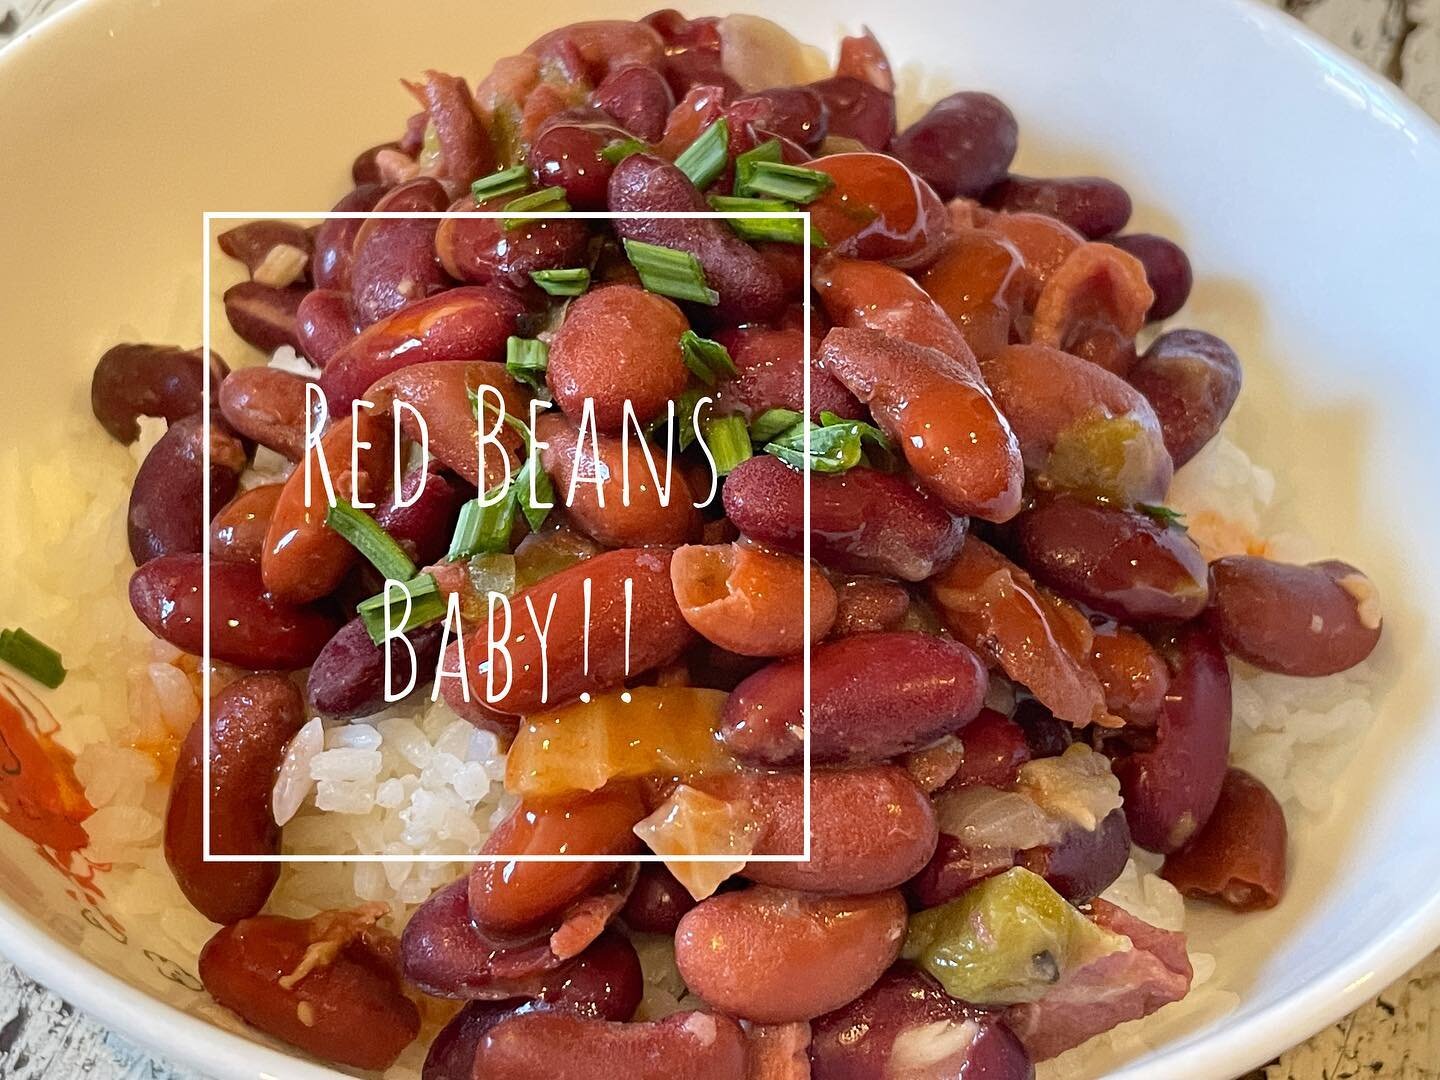 It&rsquo;s Monday! Y&rsquo;all know what that means&hellip;red beans and rice as tonight&rsquo;s special&hellip;this tastiness pairs beautifully with these cool jazz sounds. Play it again Joe. 
#kimbros #franklintn #redbeansandrice #kimbrospickinparl